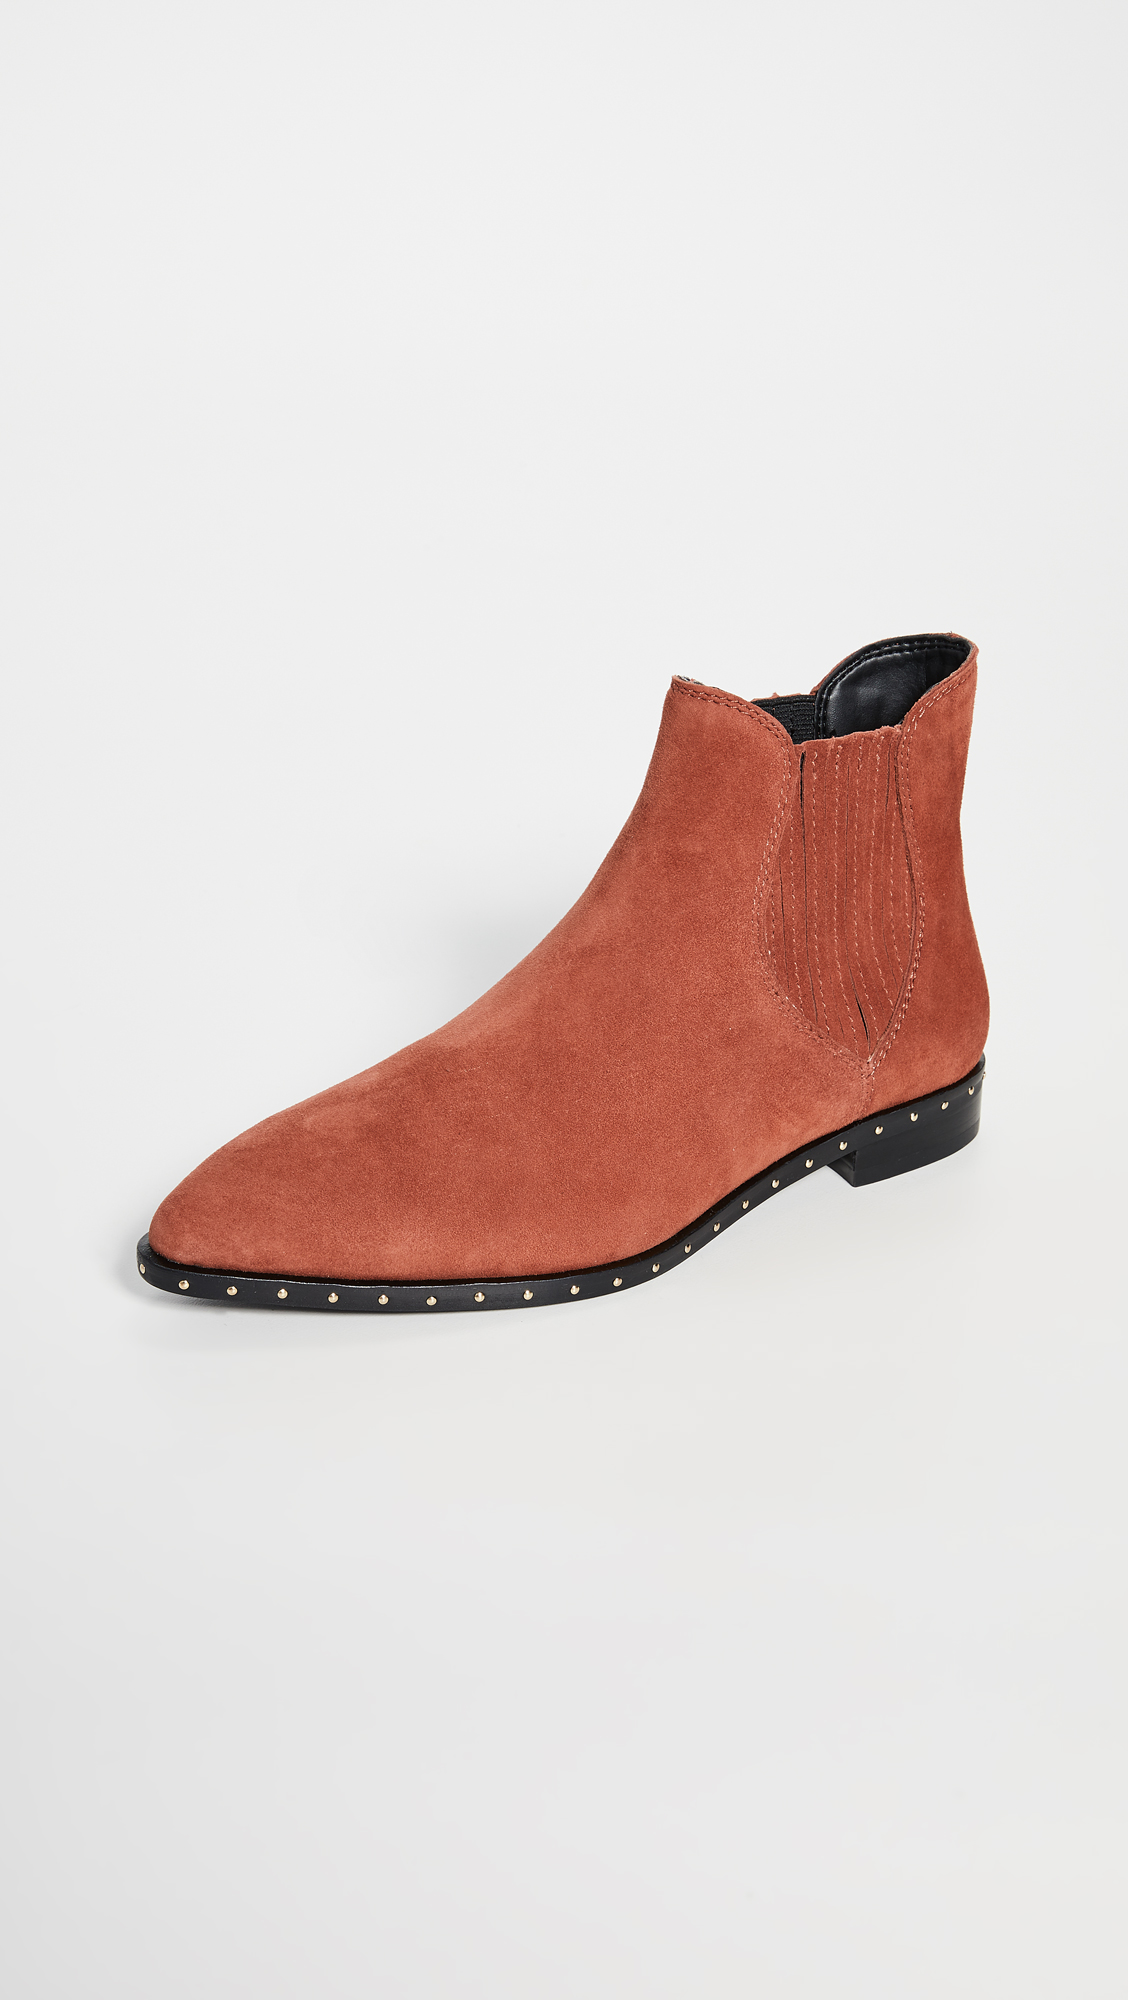 narrow ankle boots uk